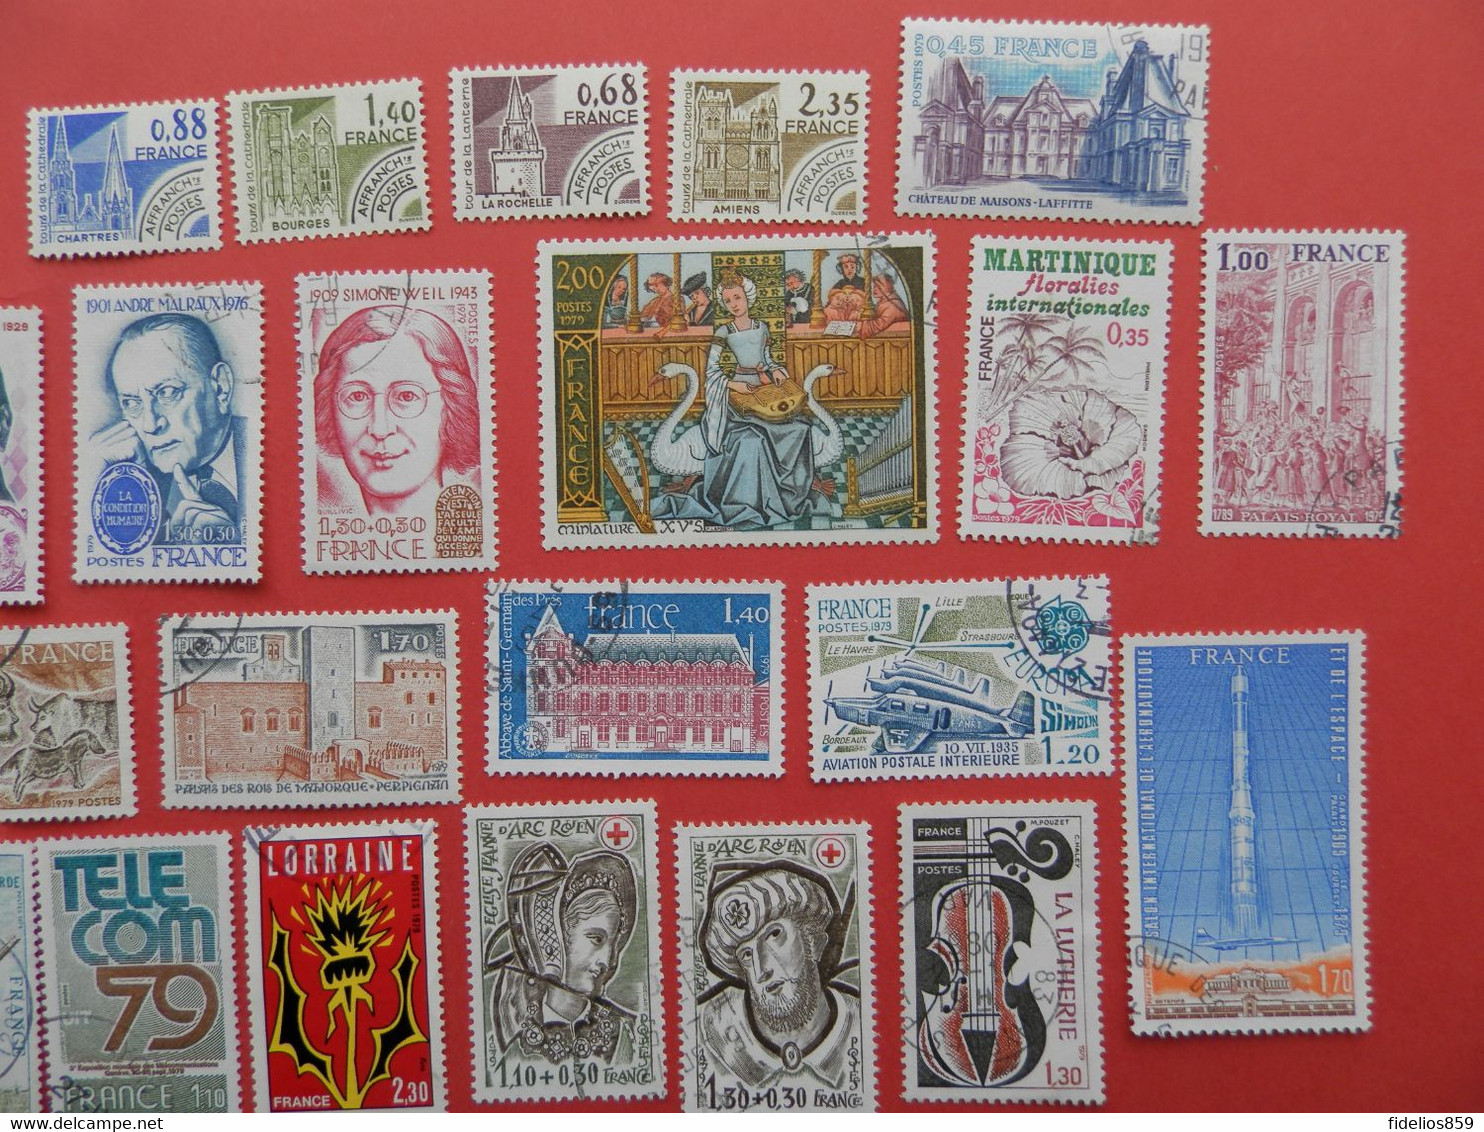 FRANCE OBLITERES LUXE : ANNEE COMPLETE 1979 ( MANQUE 2 TIMBRES ) SOIT 45 TIMBRES POSTE DIFFERENTS + PA 52 + PREOS 158/65 - 1970-1979